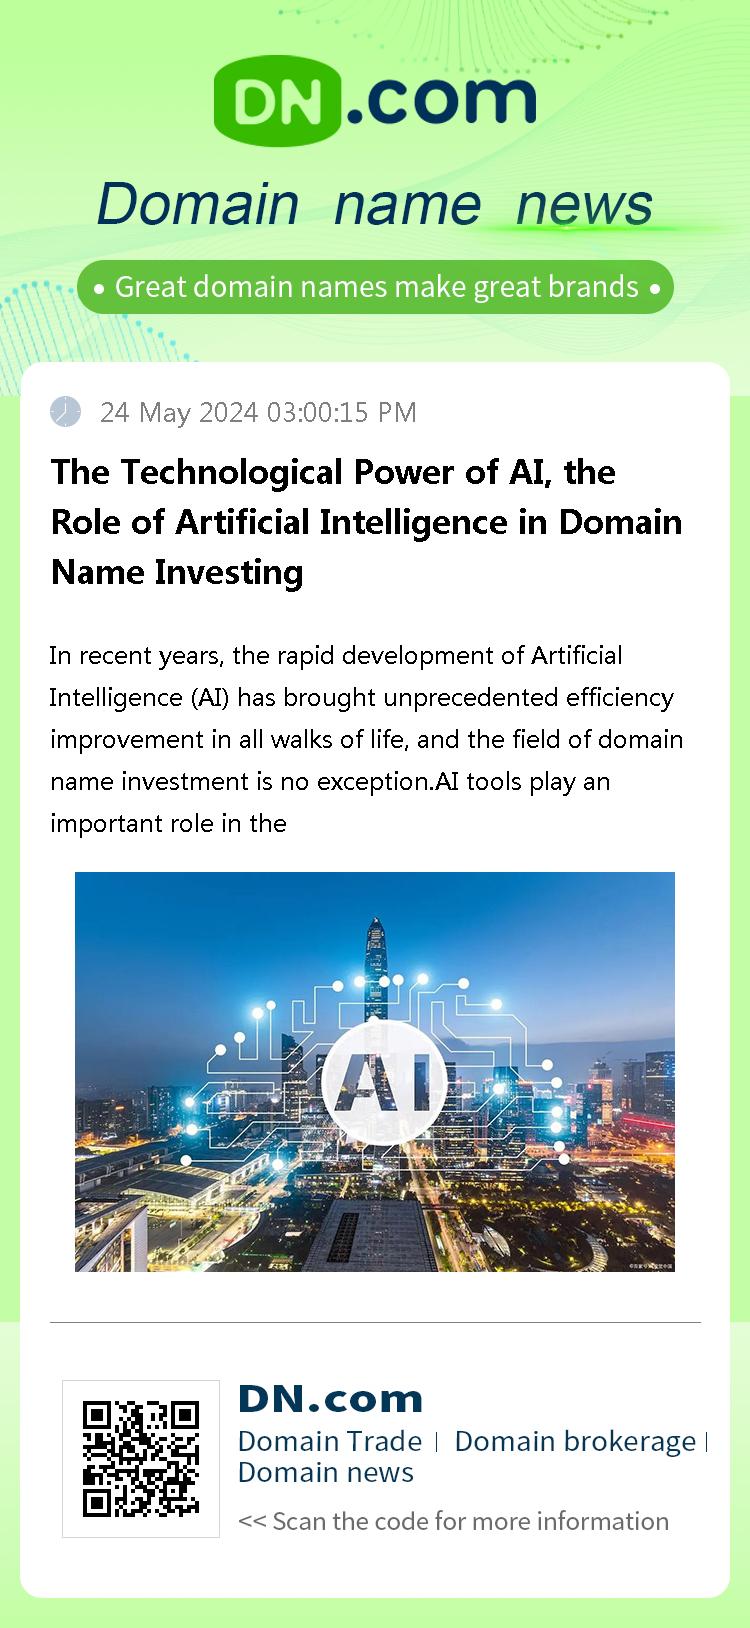 The Technological Power of AI, the Role of Artificial Intelligence in Domain Name Investing